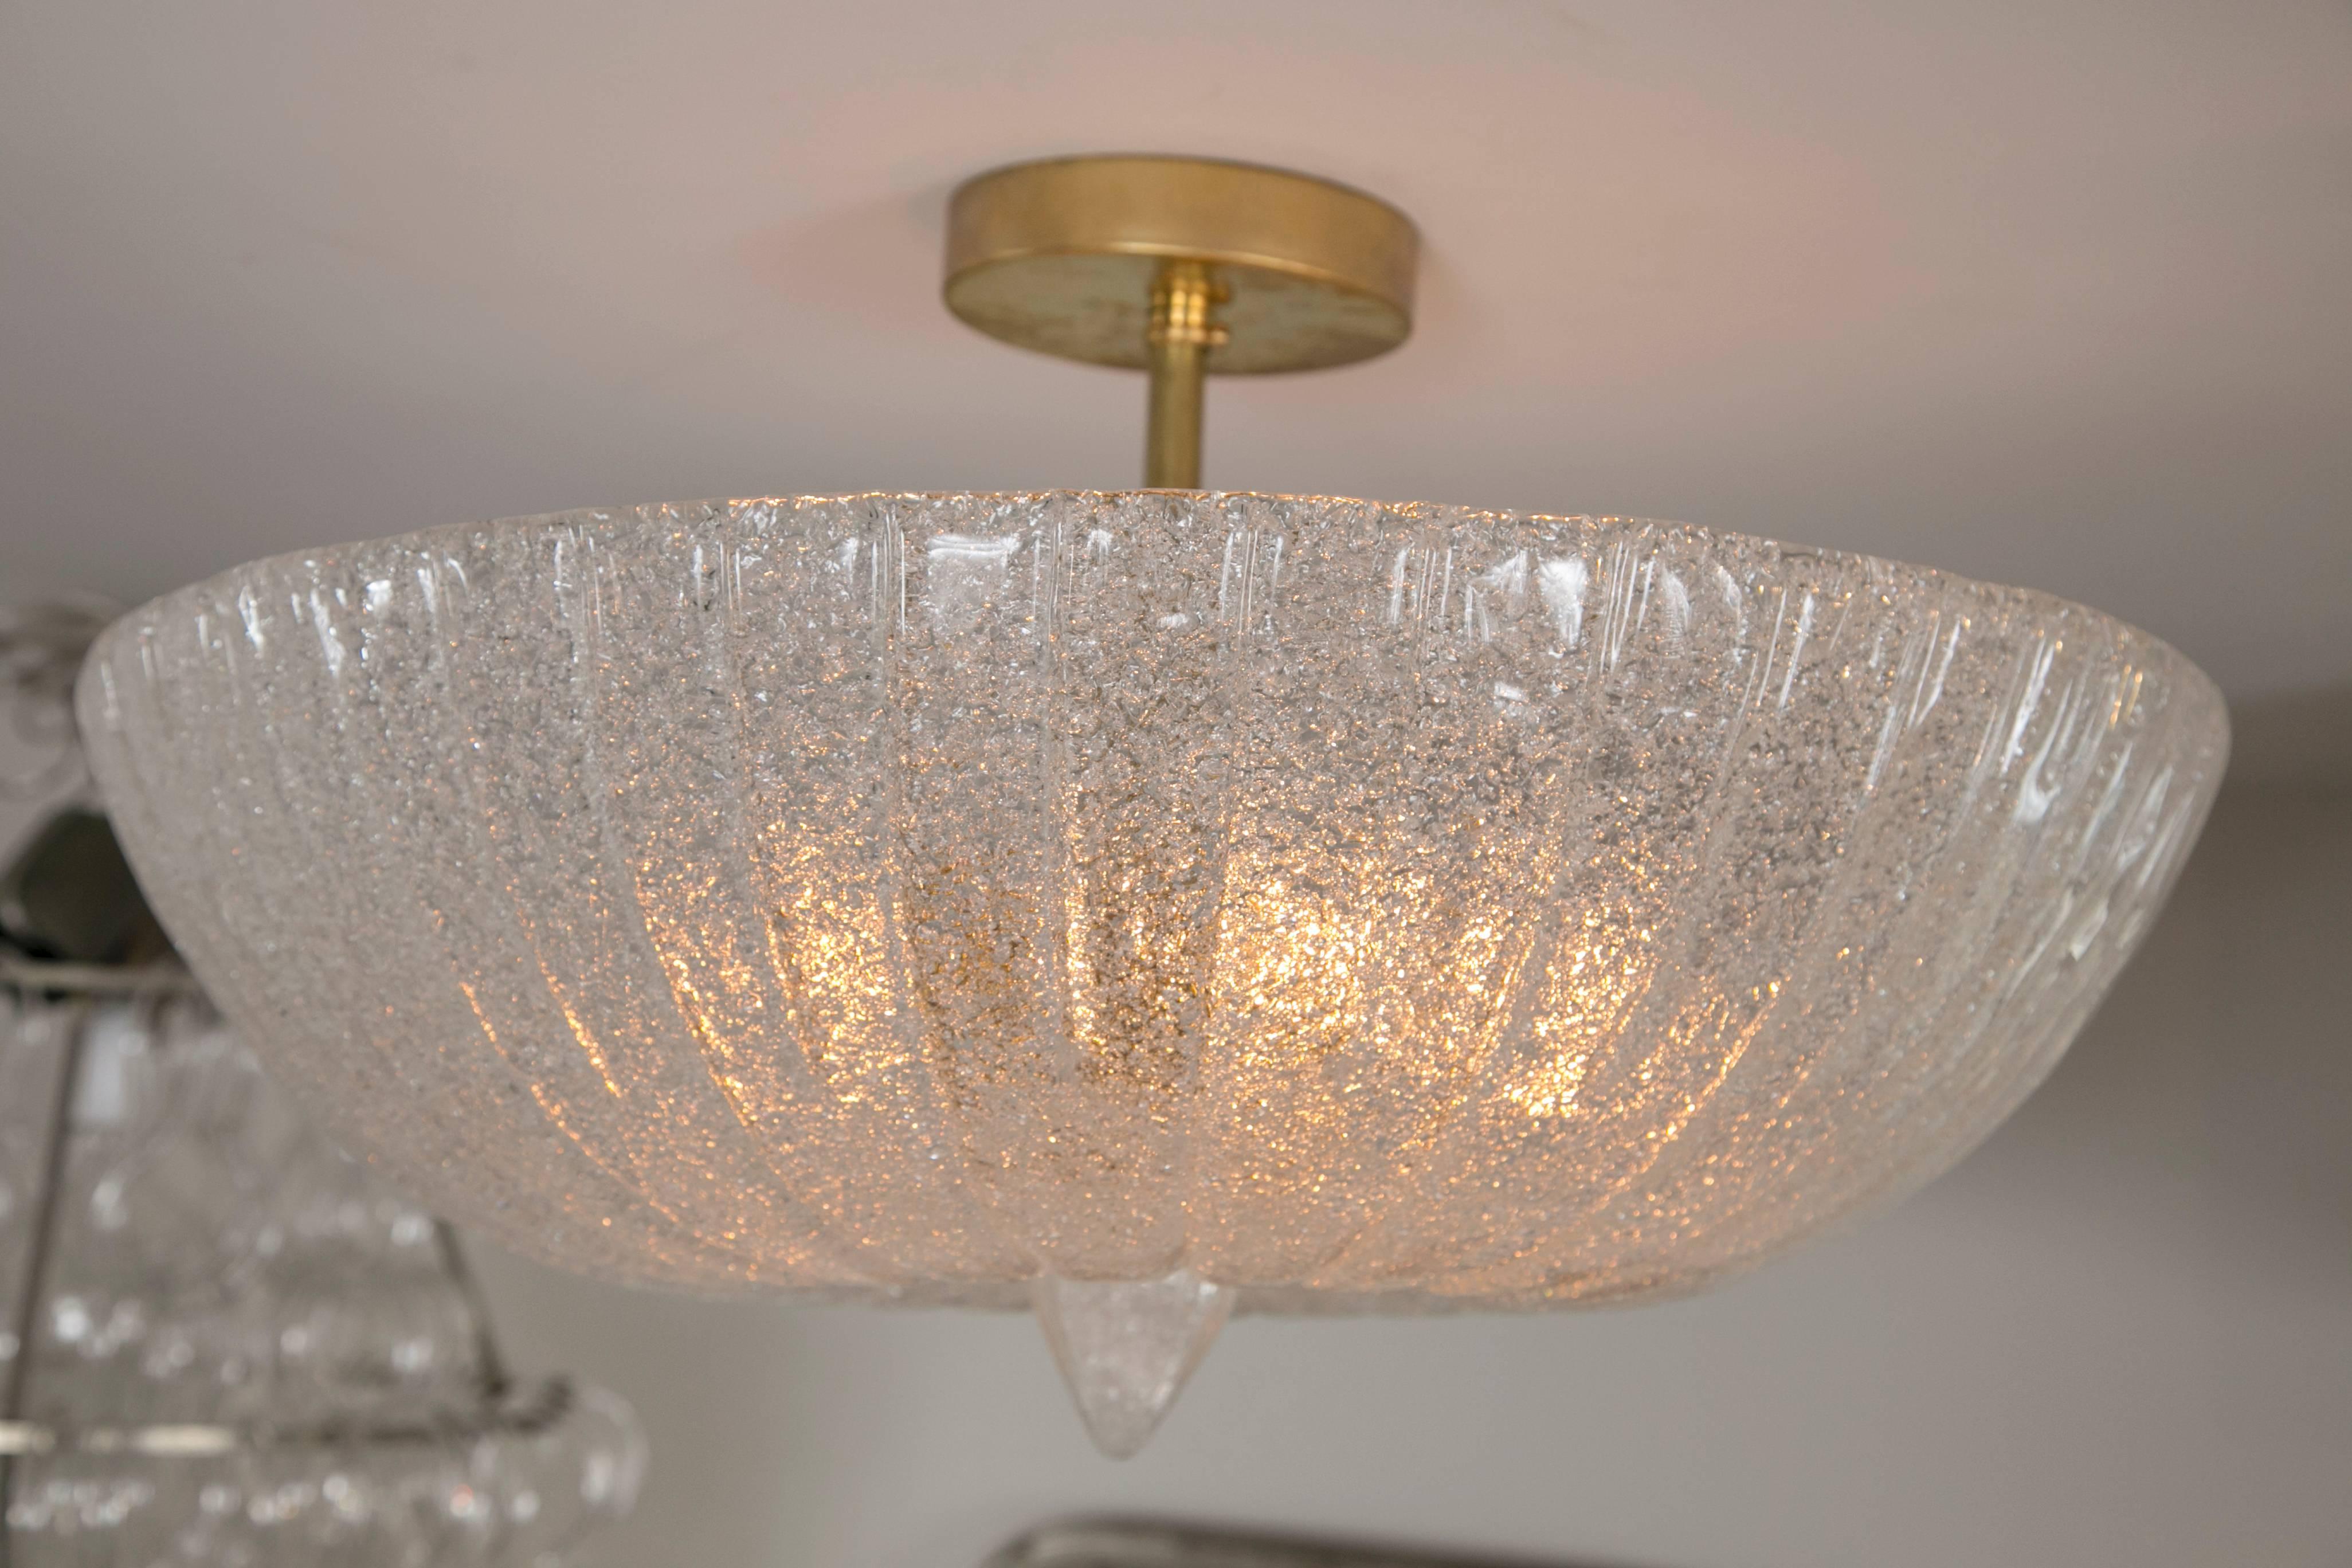 Elegant frosted icy  Murano glass blown ceiling fixture with matching glass finial

This fixture will be made install ready with unlacquered brass hardware to match the brass detail on the finial and electrified to code once purchased. Please